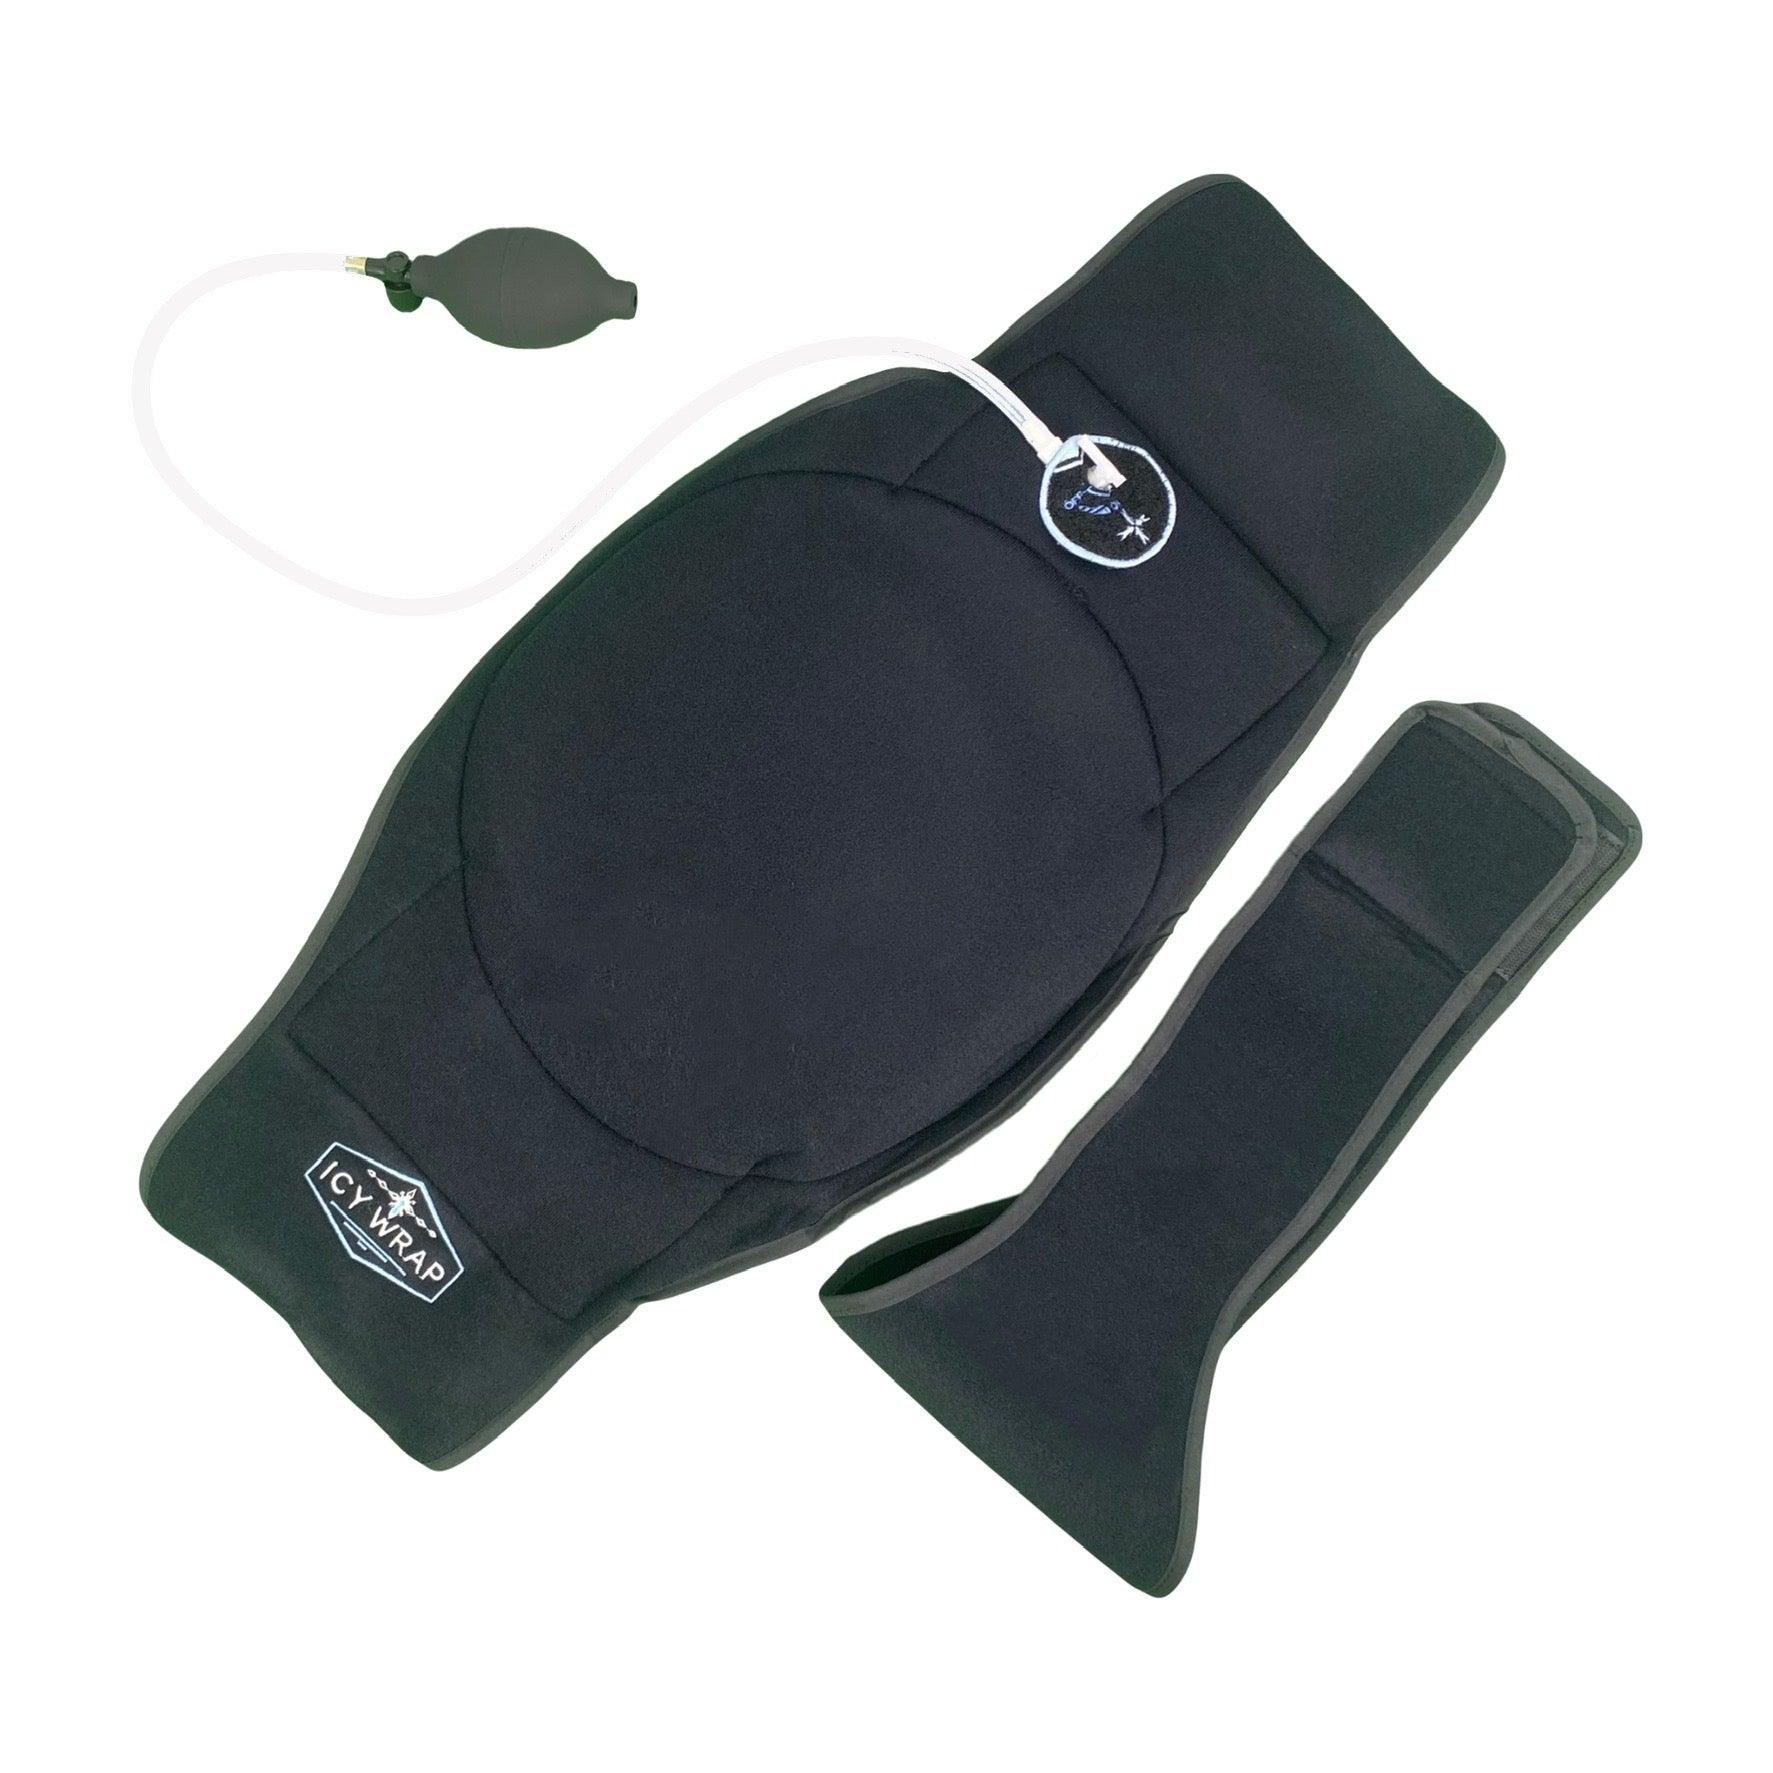 Icy Wrap Cold Compression Orthopedic Support Wrap - IW-Back Icy Wrap Cold Compression Orthopedic Support Wrap - undefined by Supply Physical Therapy ice wraps